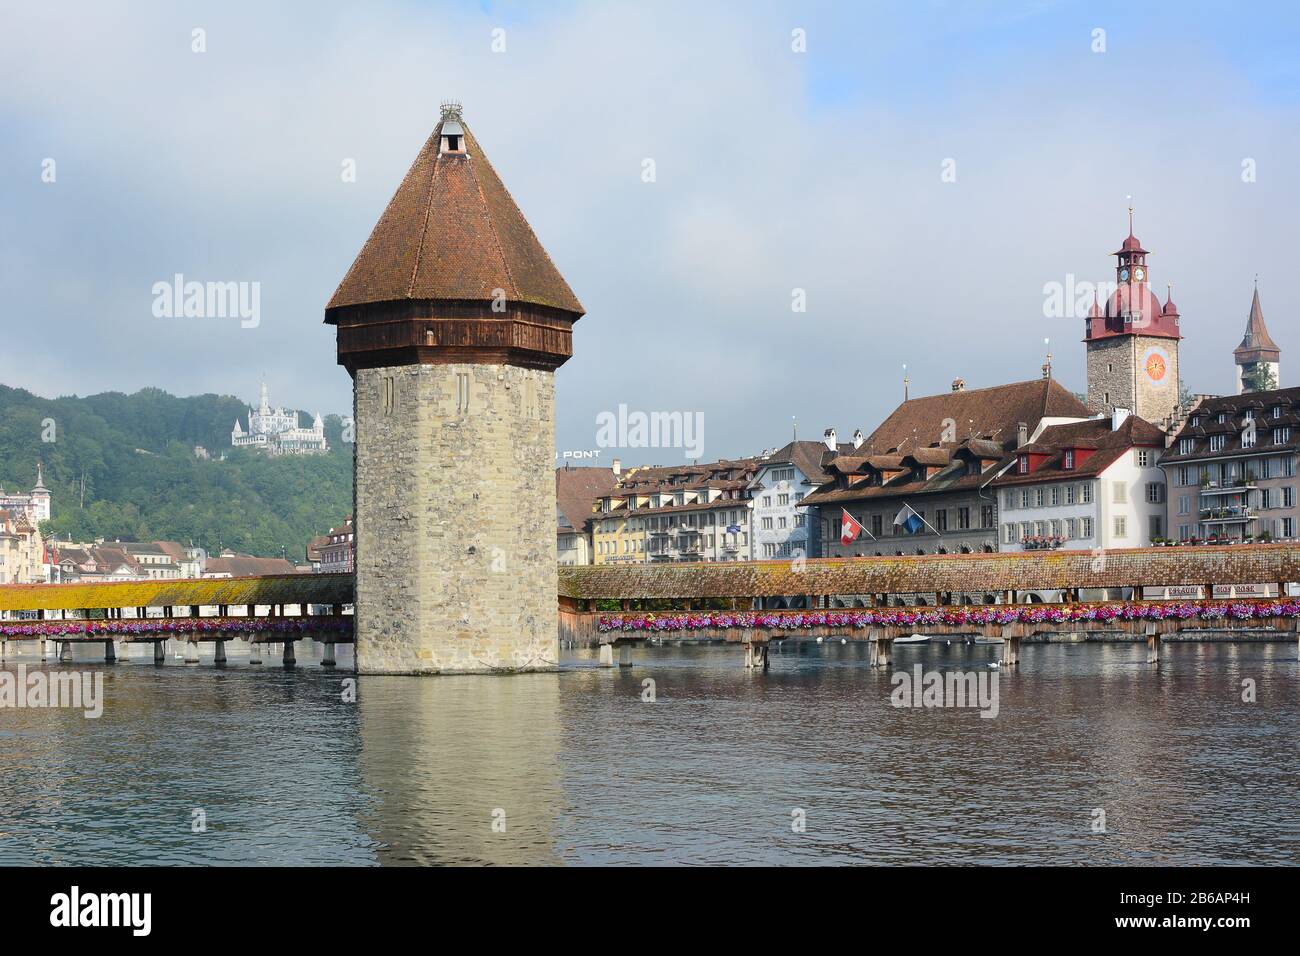 LUCERNE, SWITZERLAND - JULY 2, 2014: Chapel Bridge and Water Tower, Lucerne. The wooden covered bridge spans the Reuss River with the with Mt. Pilauts Stock Photo